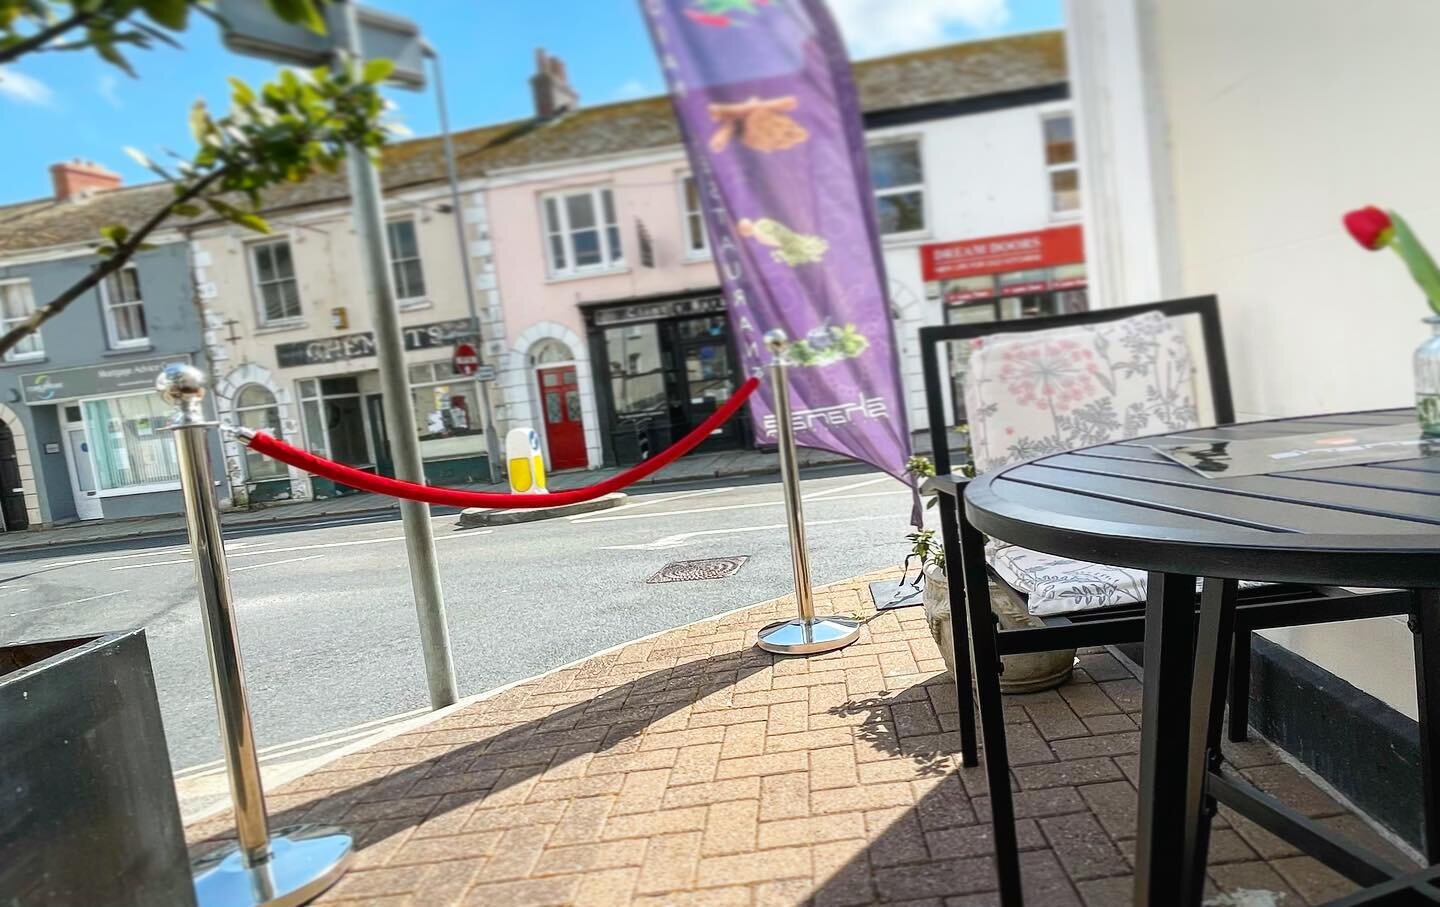 Enjoy a Delicious Curry at Shanaz Outdoor Dining!🍴Visit www.theshanaz.com TO VIEW OUR OUTDOOR MENU #outdoordining #truro #visitcornwall#mytruro#indian#snacks